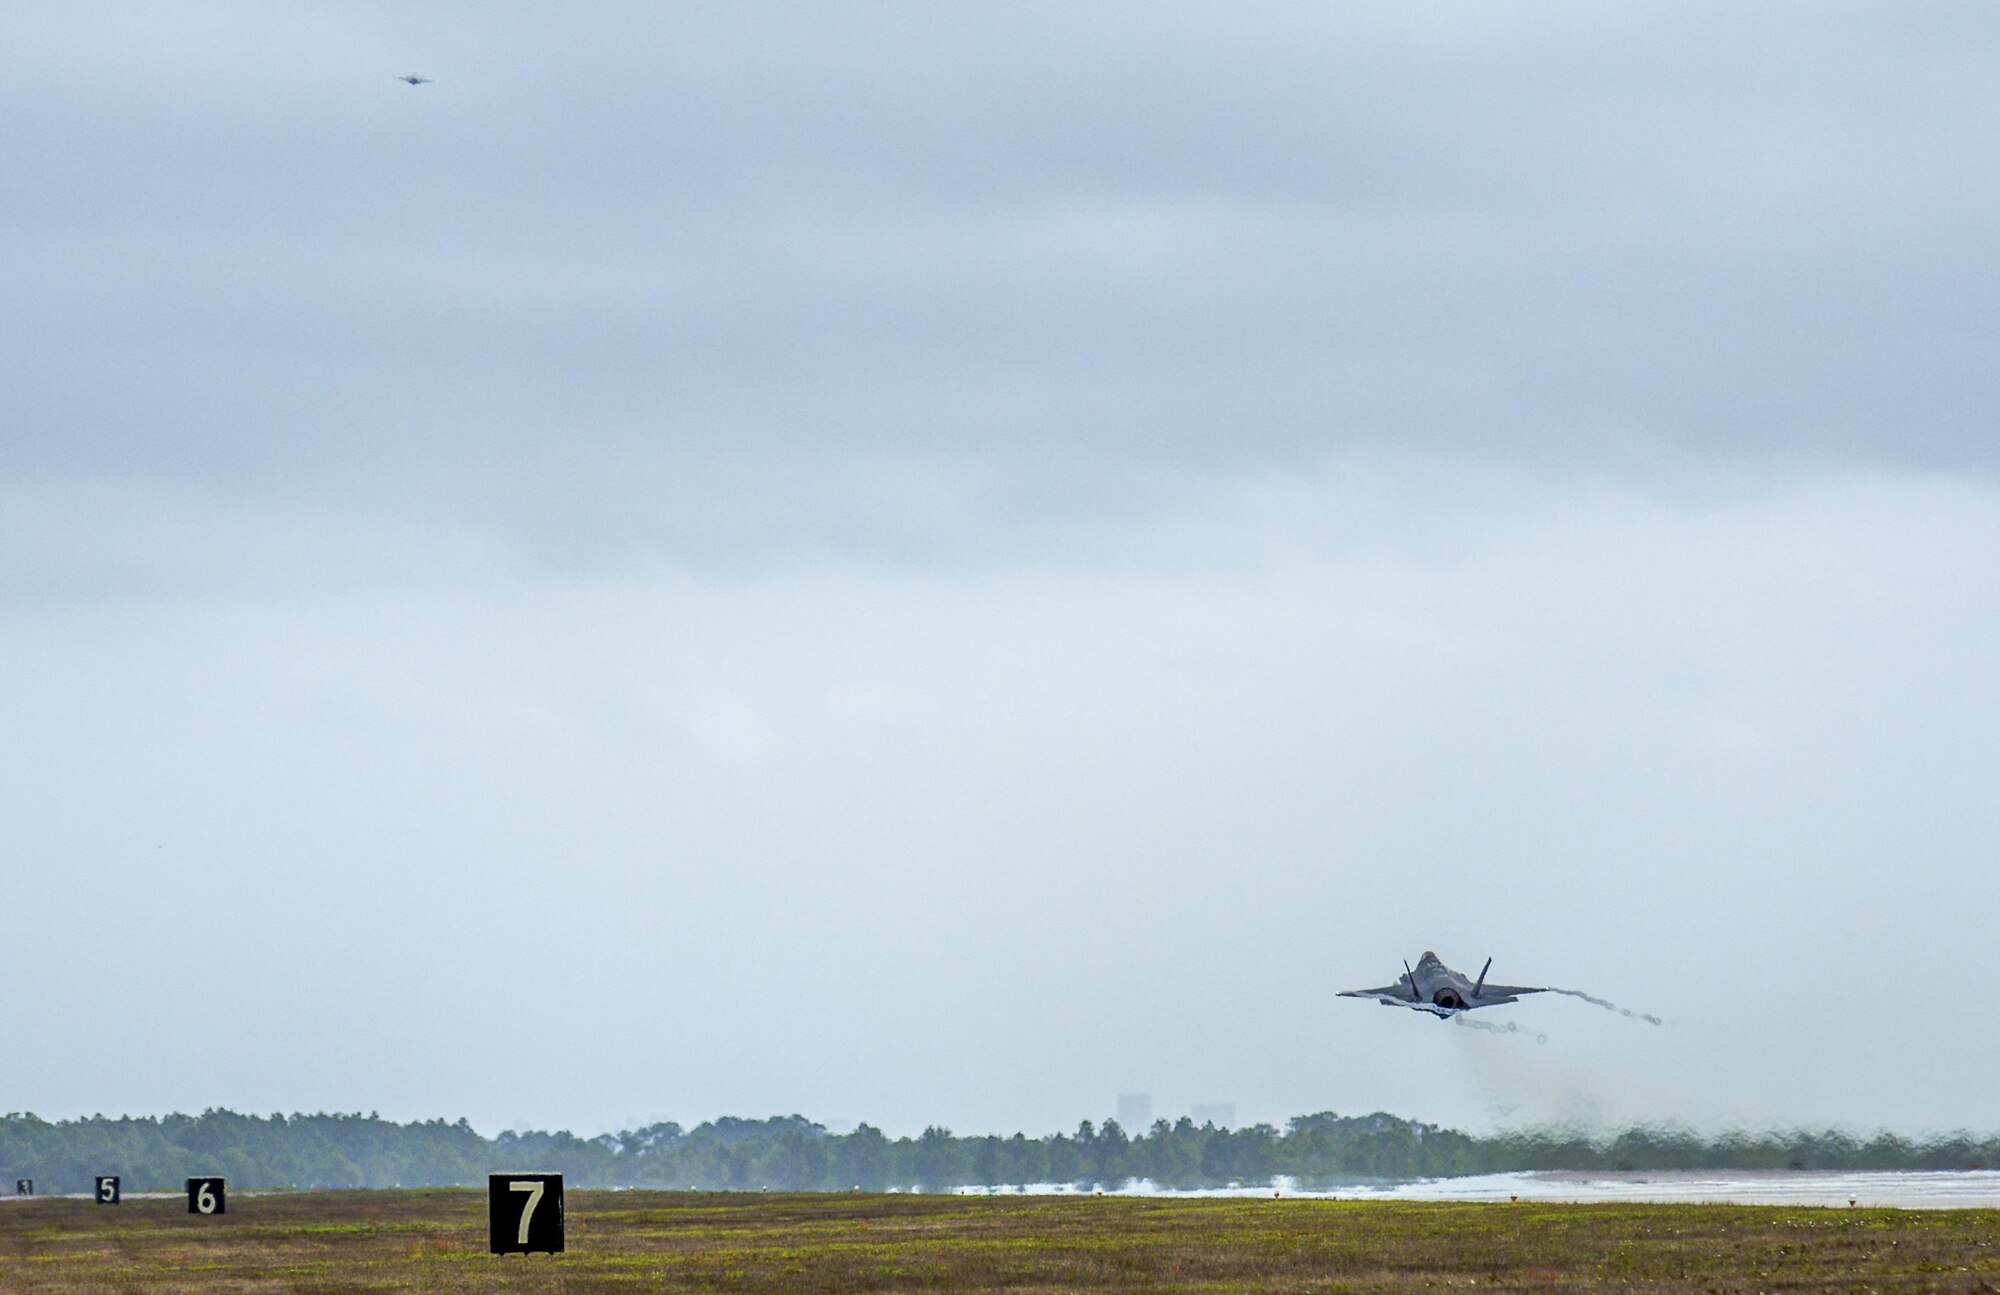 A 33rd Fighter Wing F-35A Lightning II takes off Feb. 27 to conduct sorties at Eglin Air Force Base, Fla. With conventional takeoff and landing capability, the F-35A is built for traditional Air Force bases. The F-35A is an agile, versatile, high-performance, 9g capable multirole fighter that combines stealth, sensor fusion, and unprecedented situational awareness. The 33rd Fighter Wing is a graduate flying and maintenance training wing for the F-35 Lightning II. (U.S. Air Force photo/Kristin Stewart)